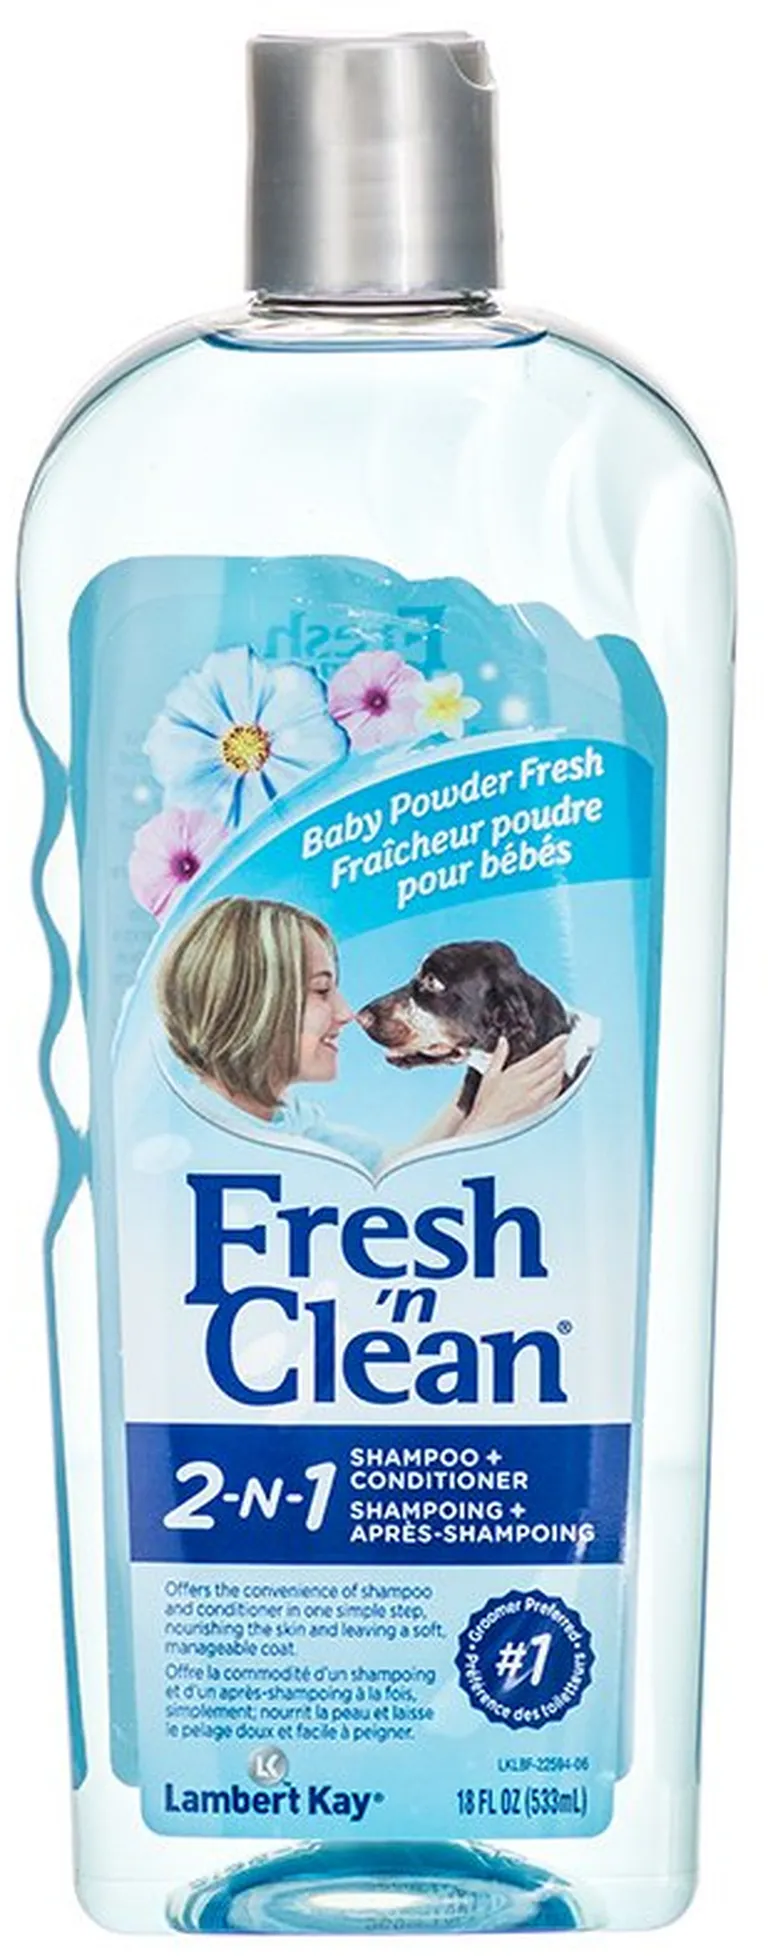 Fresh n Clean 2 in 1 Shampoo and Conditioner Photo 1